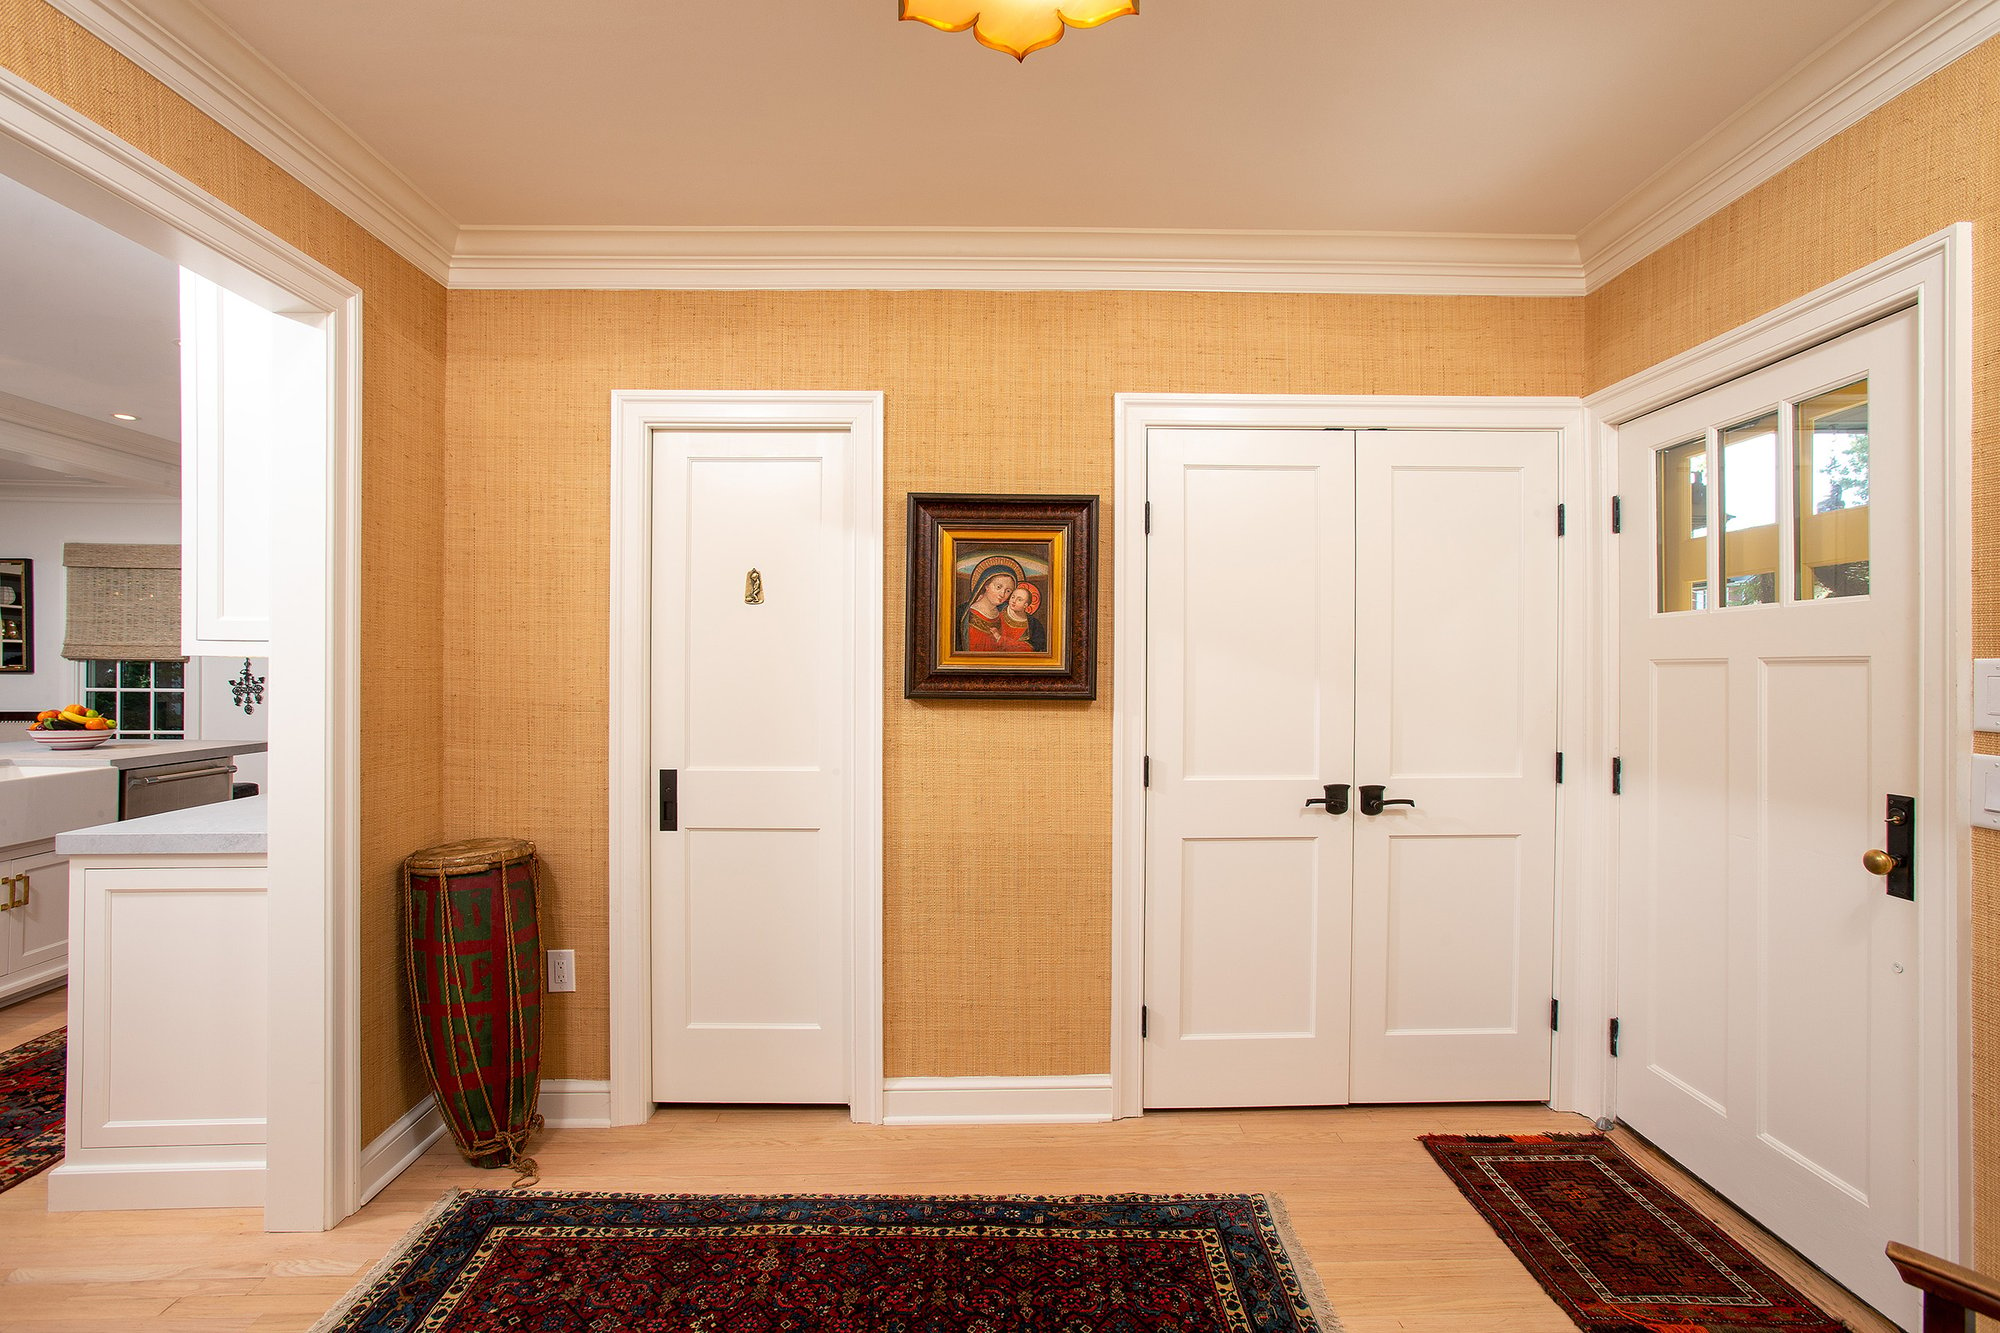 Front entrance and mudroom of a home with a coat closet and additional linen closet and yellow textured wallpaper